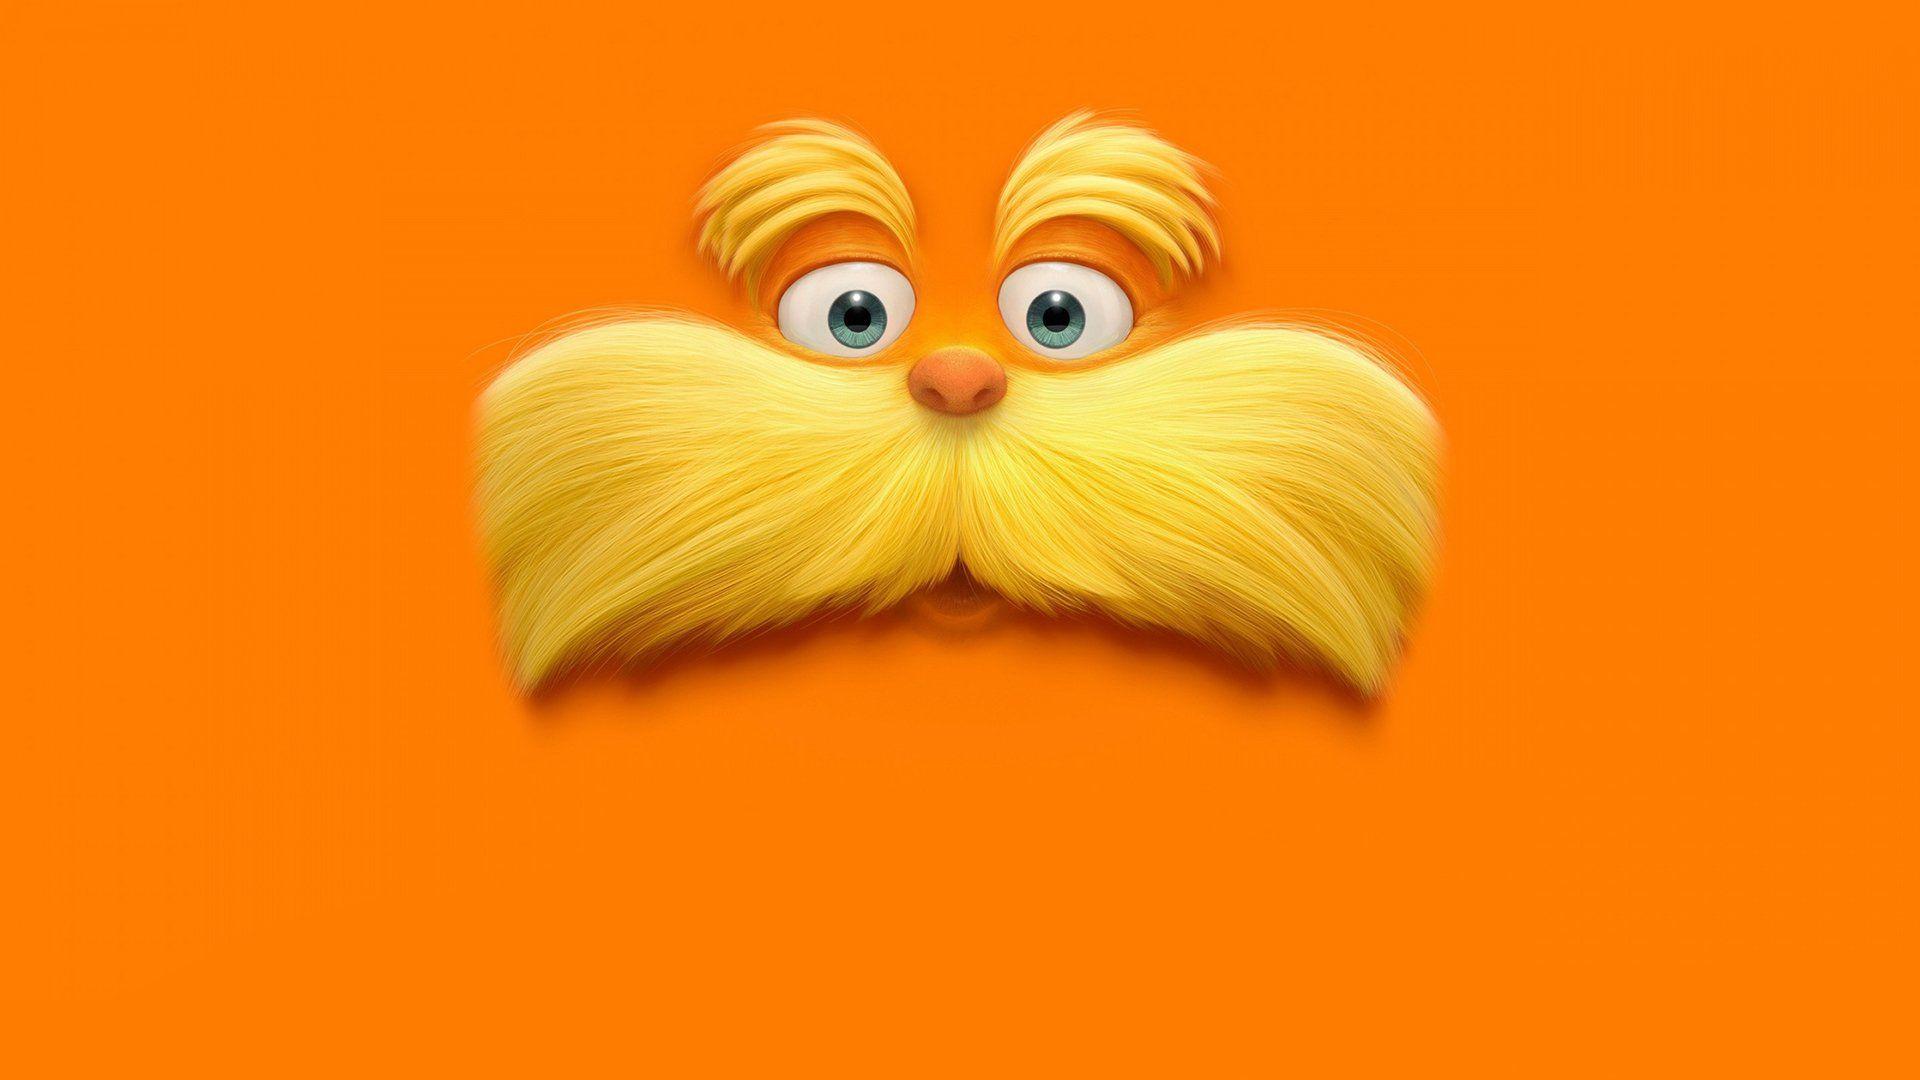 The Lorax Wallpapers Top Free The Lorax Backgrounds Wallpaperaccess 